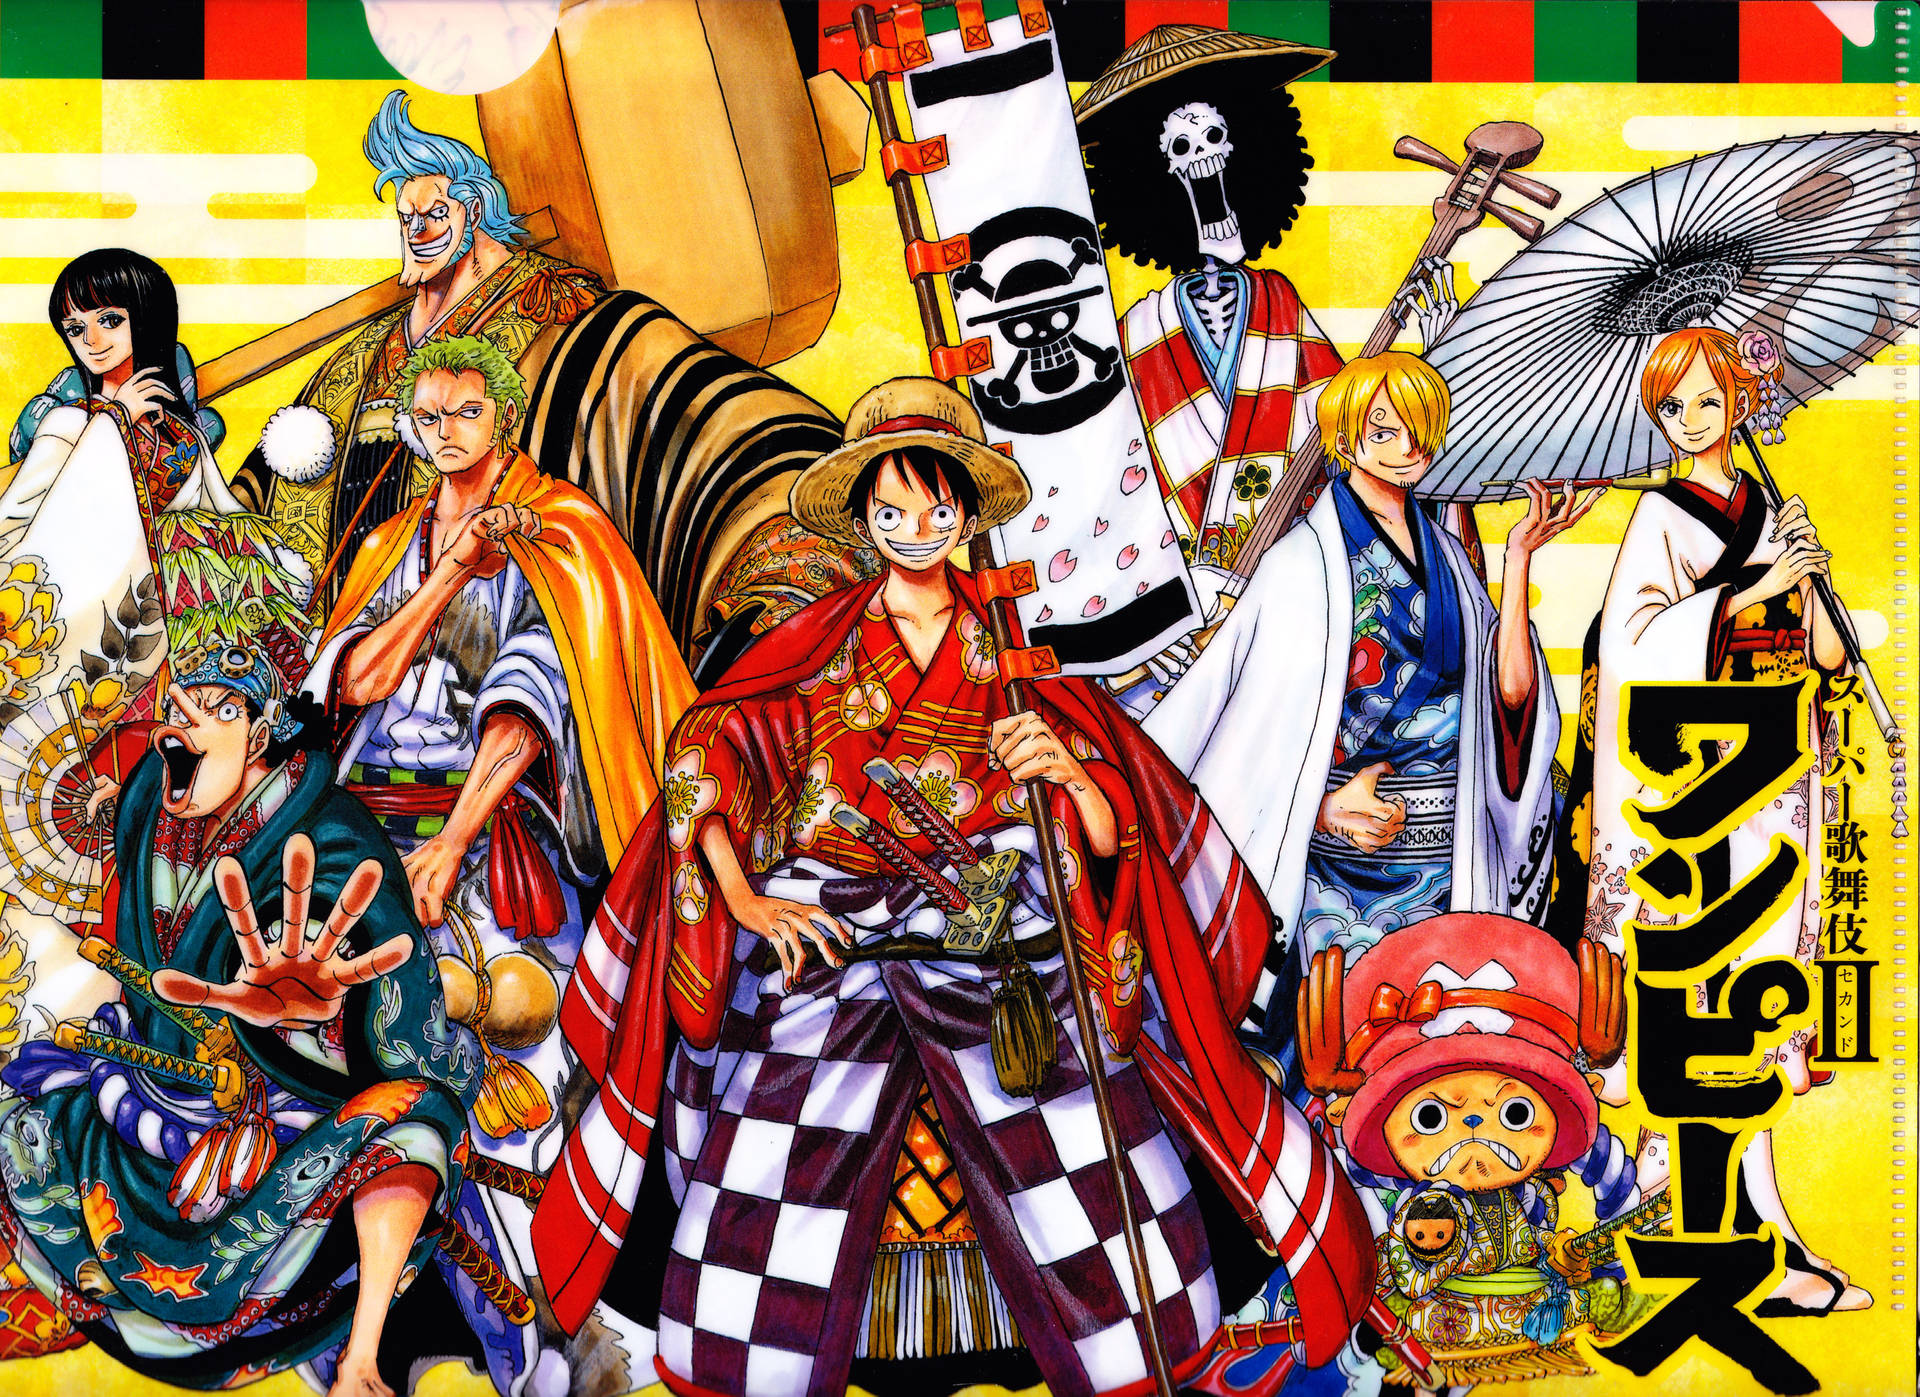 Top 999+ One Piece Wano 4k Wallpaper Full HD, 4K Free to Use